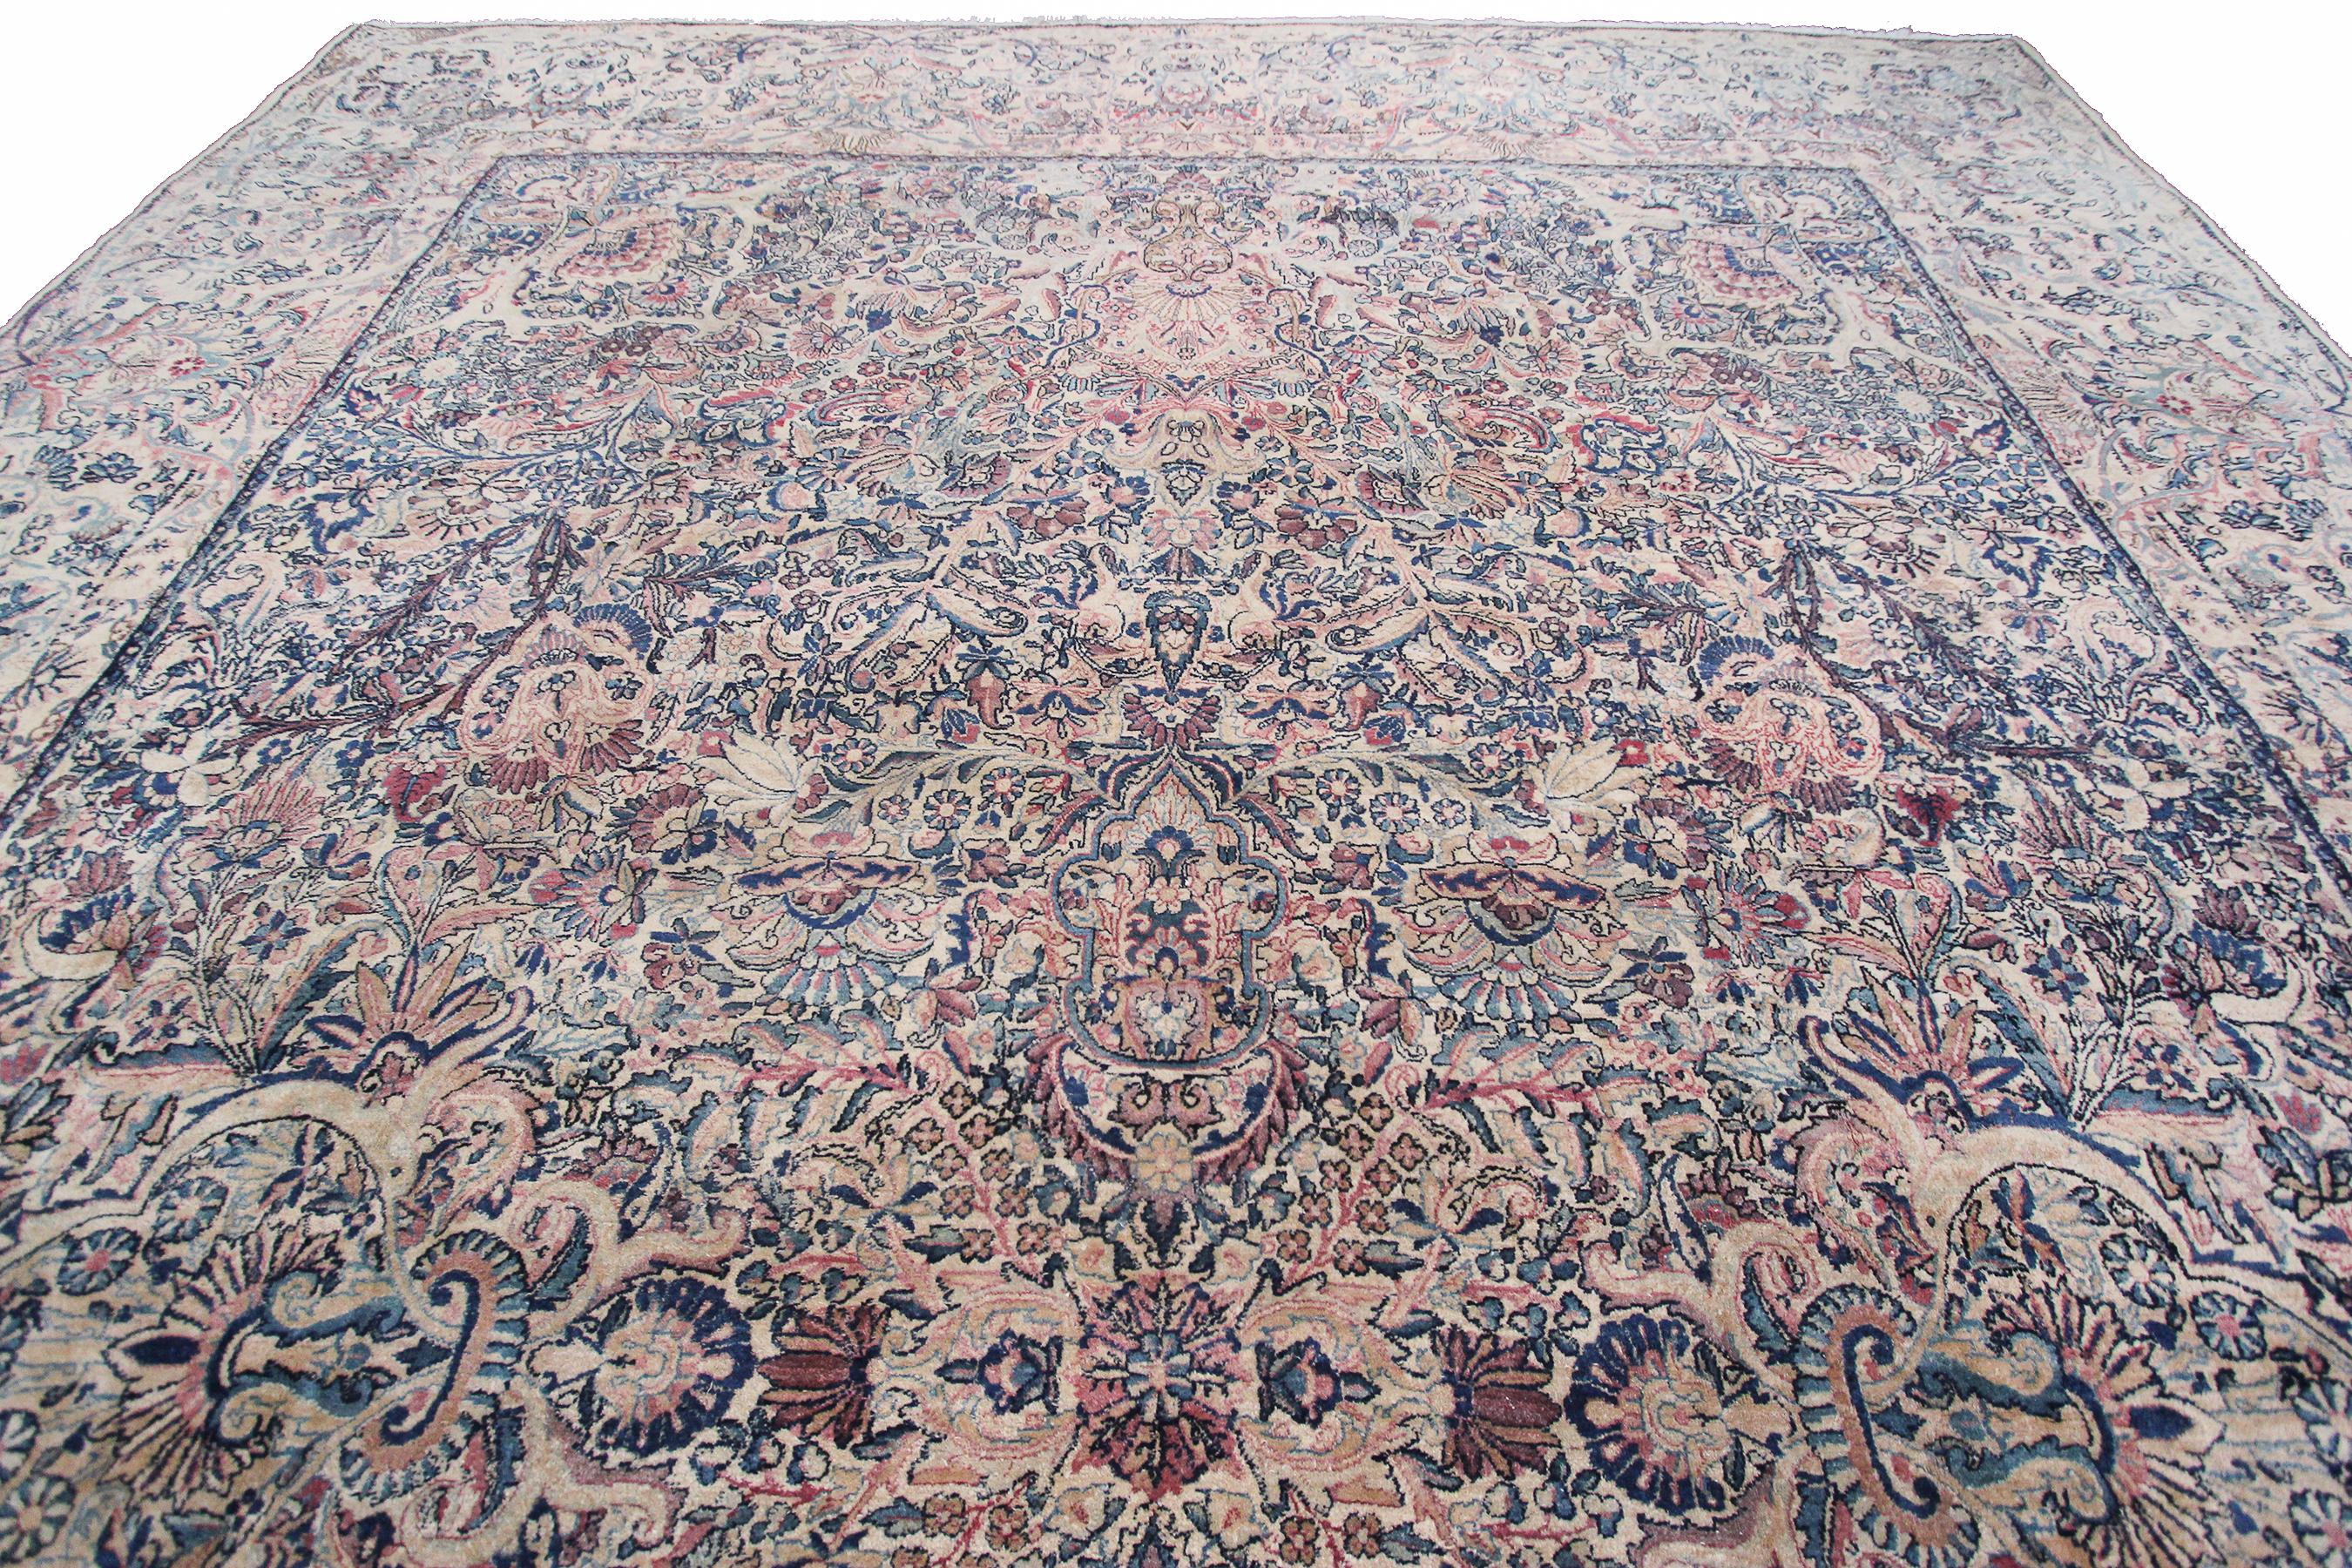 Antique Lavar Kerman Rug Rug Antique Persian Rug Persian Lavar Rug, 1890 In Good Condition For Sale In New York, NY